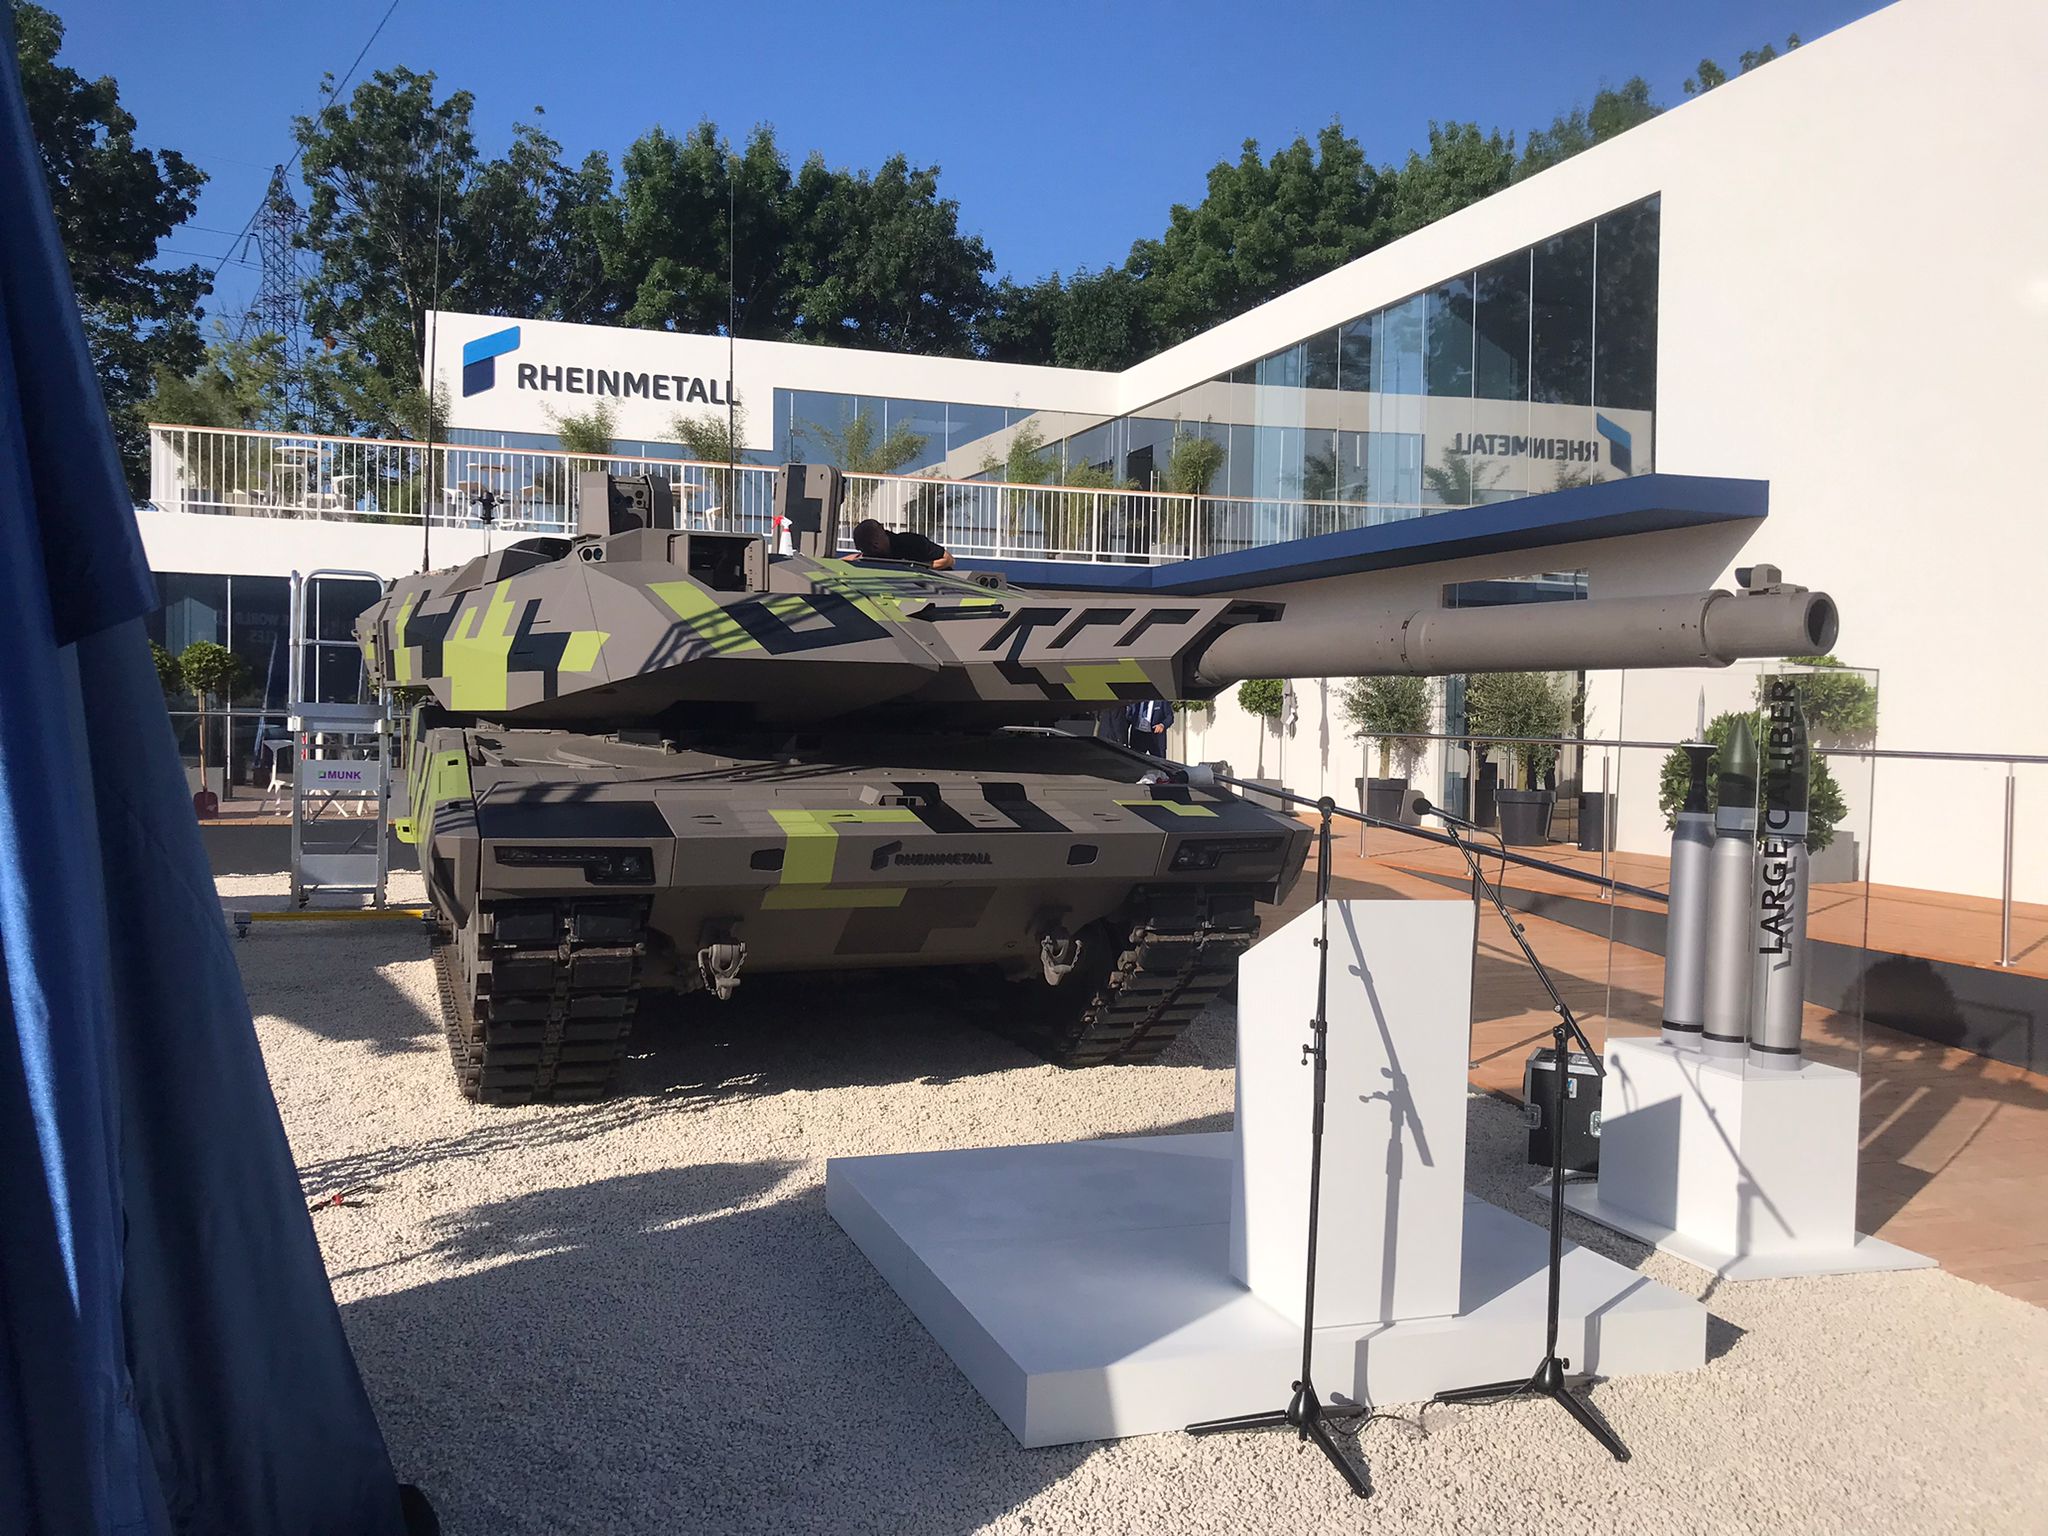 World premiere of the KF51 Panther medium tank